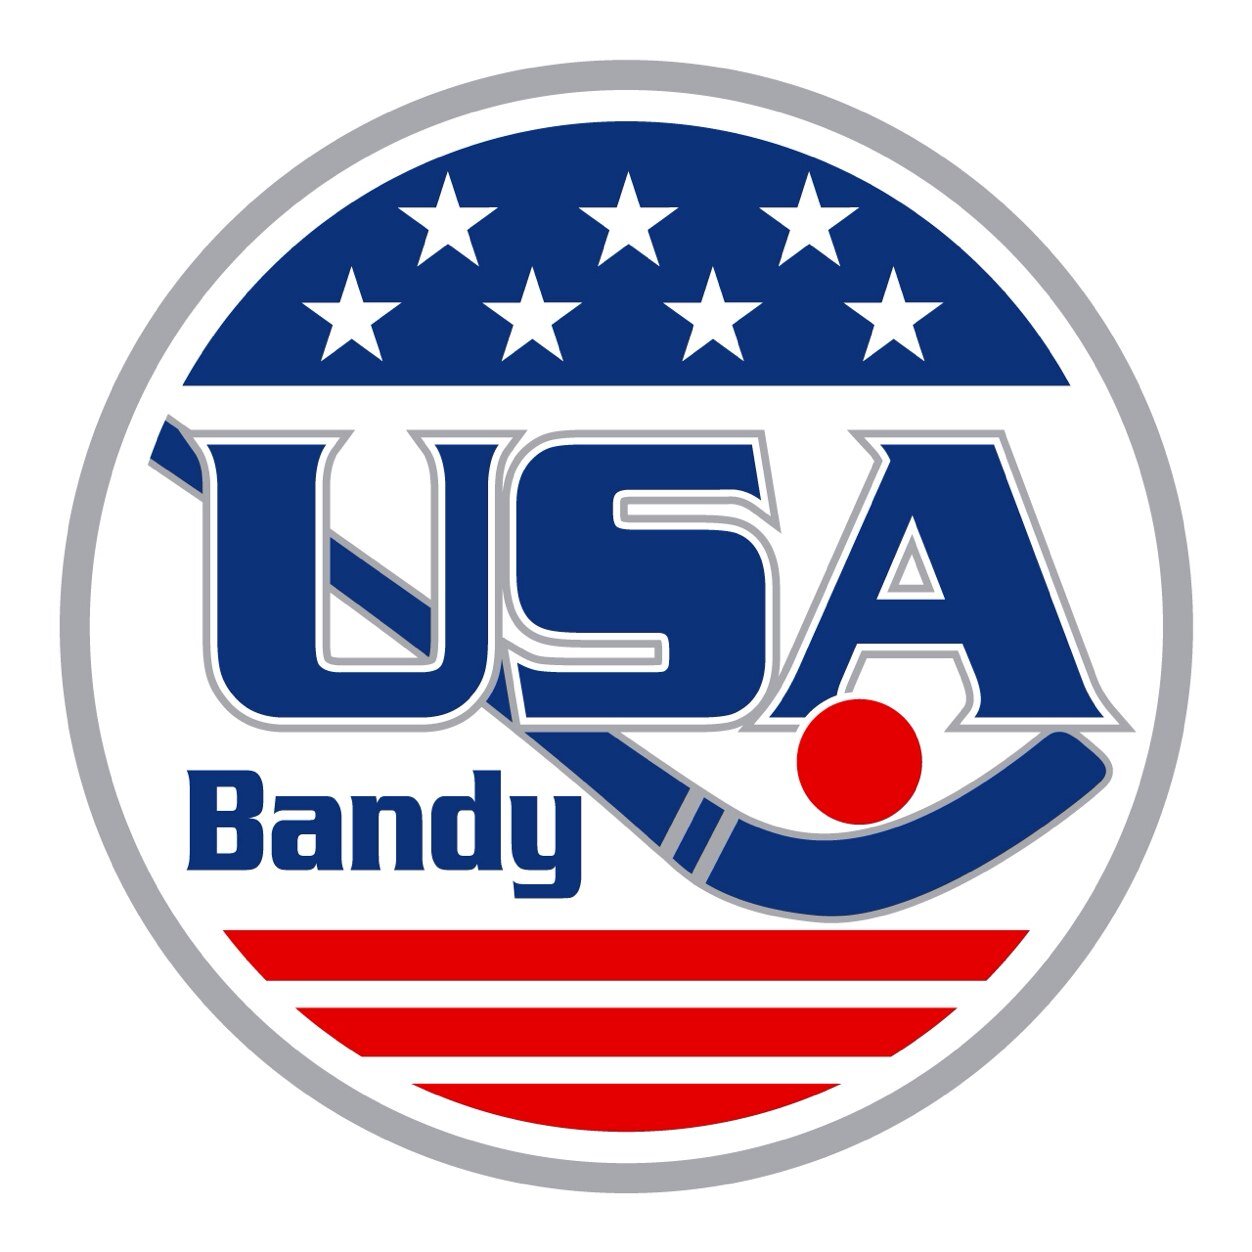 The official team representing the red, white, and bandy.